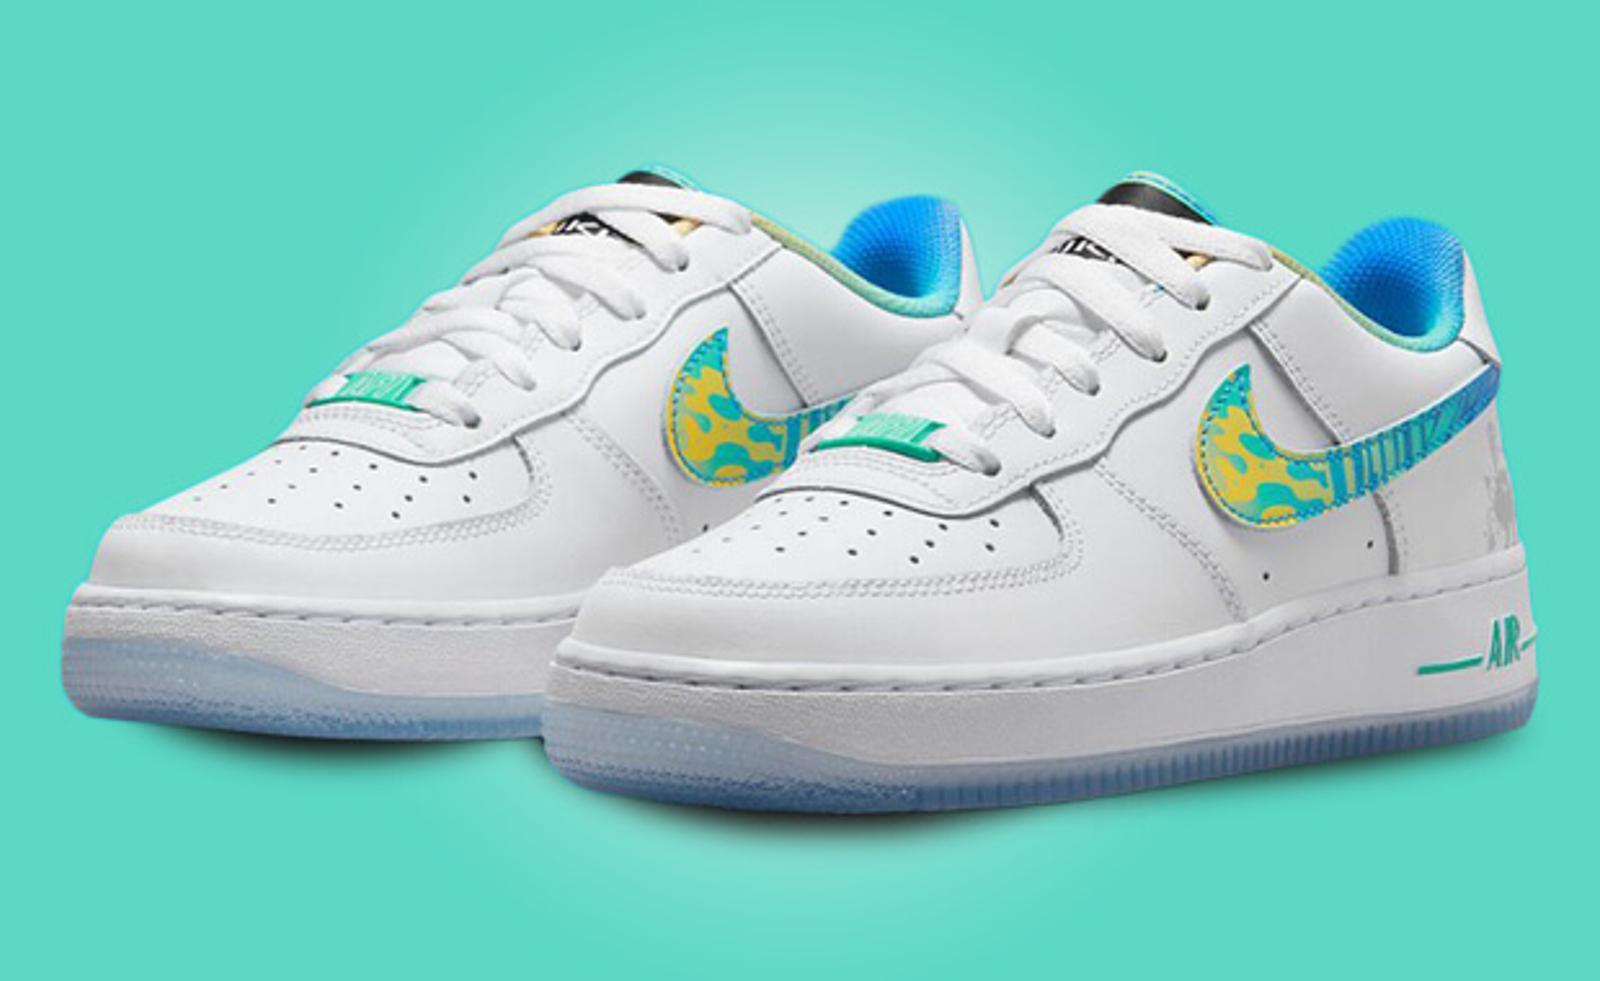 Unlock Your Space in the Kids' Exclusive Nike Air Force 1 Low